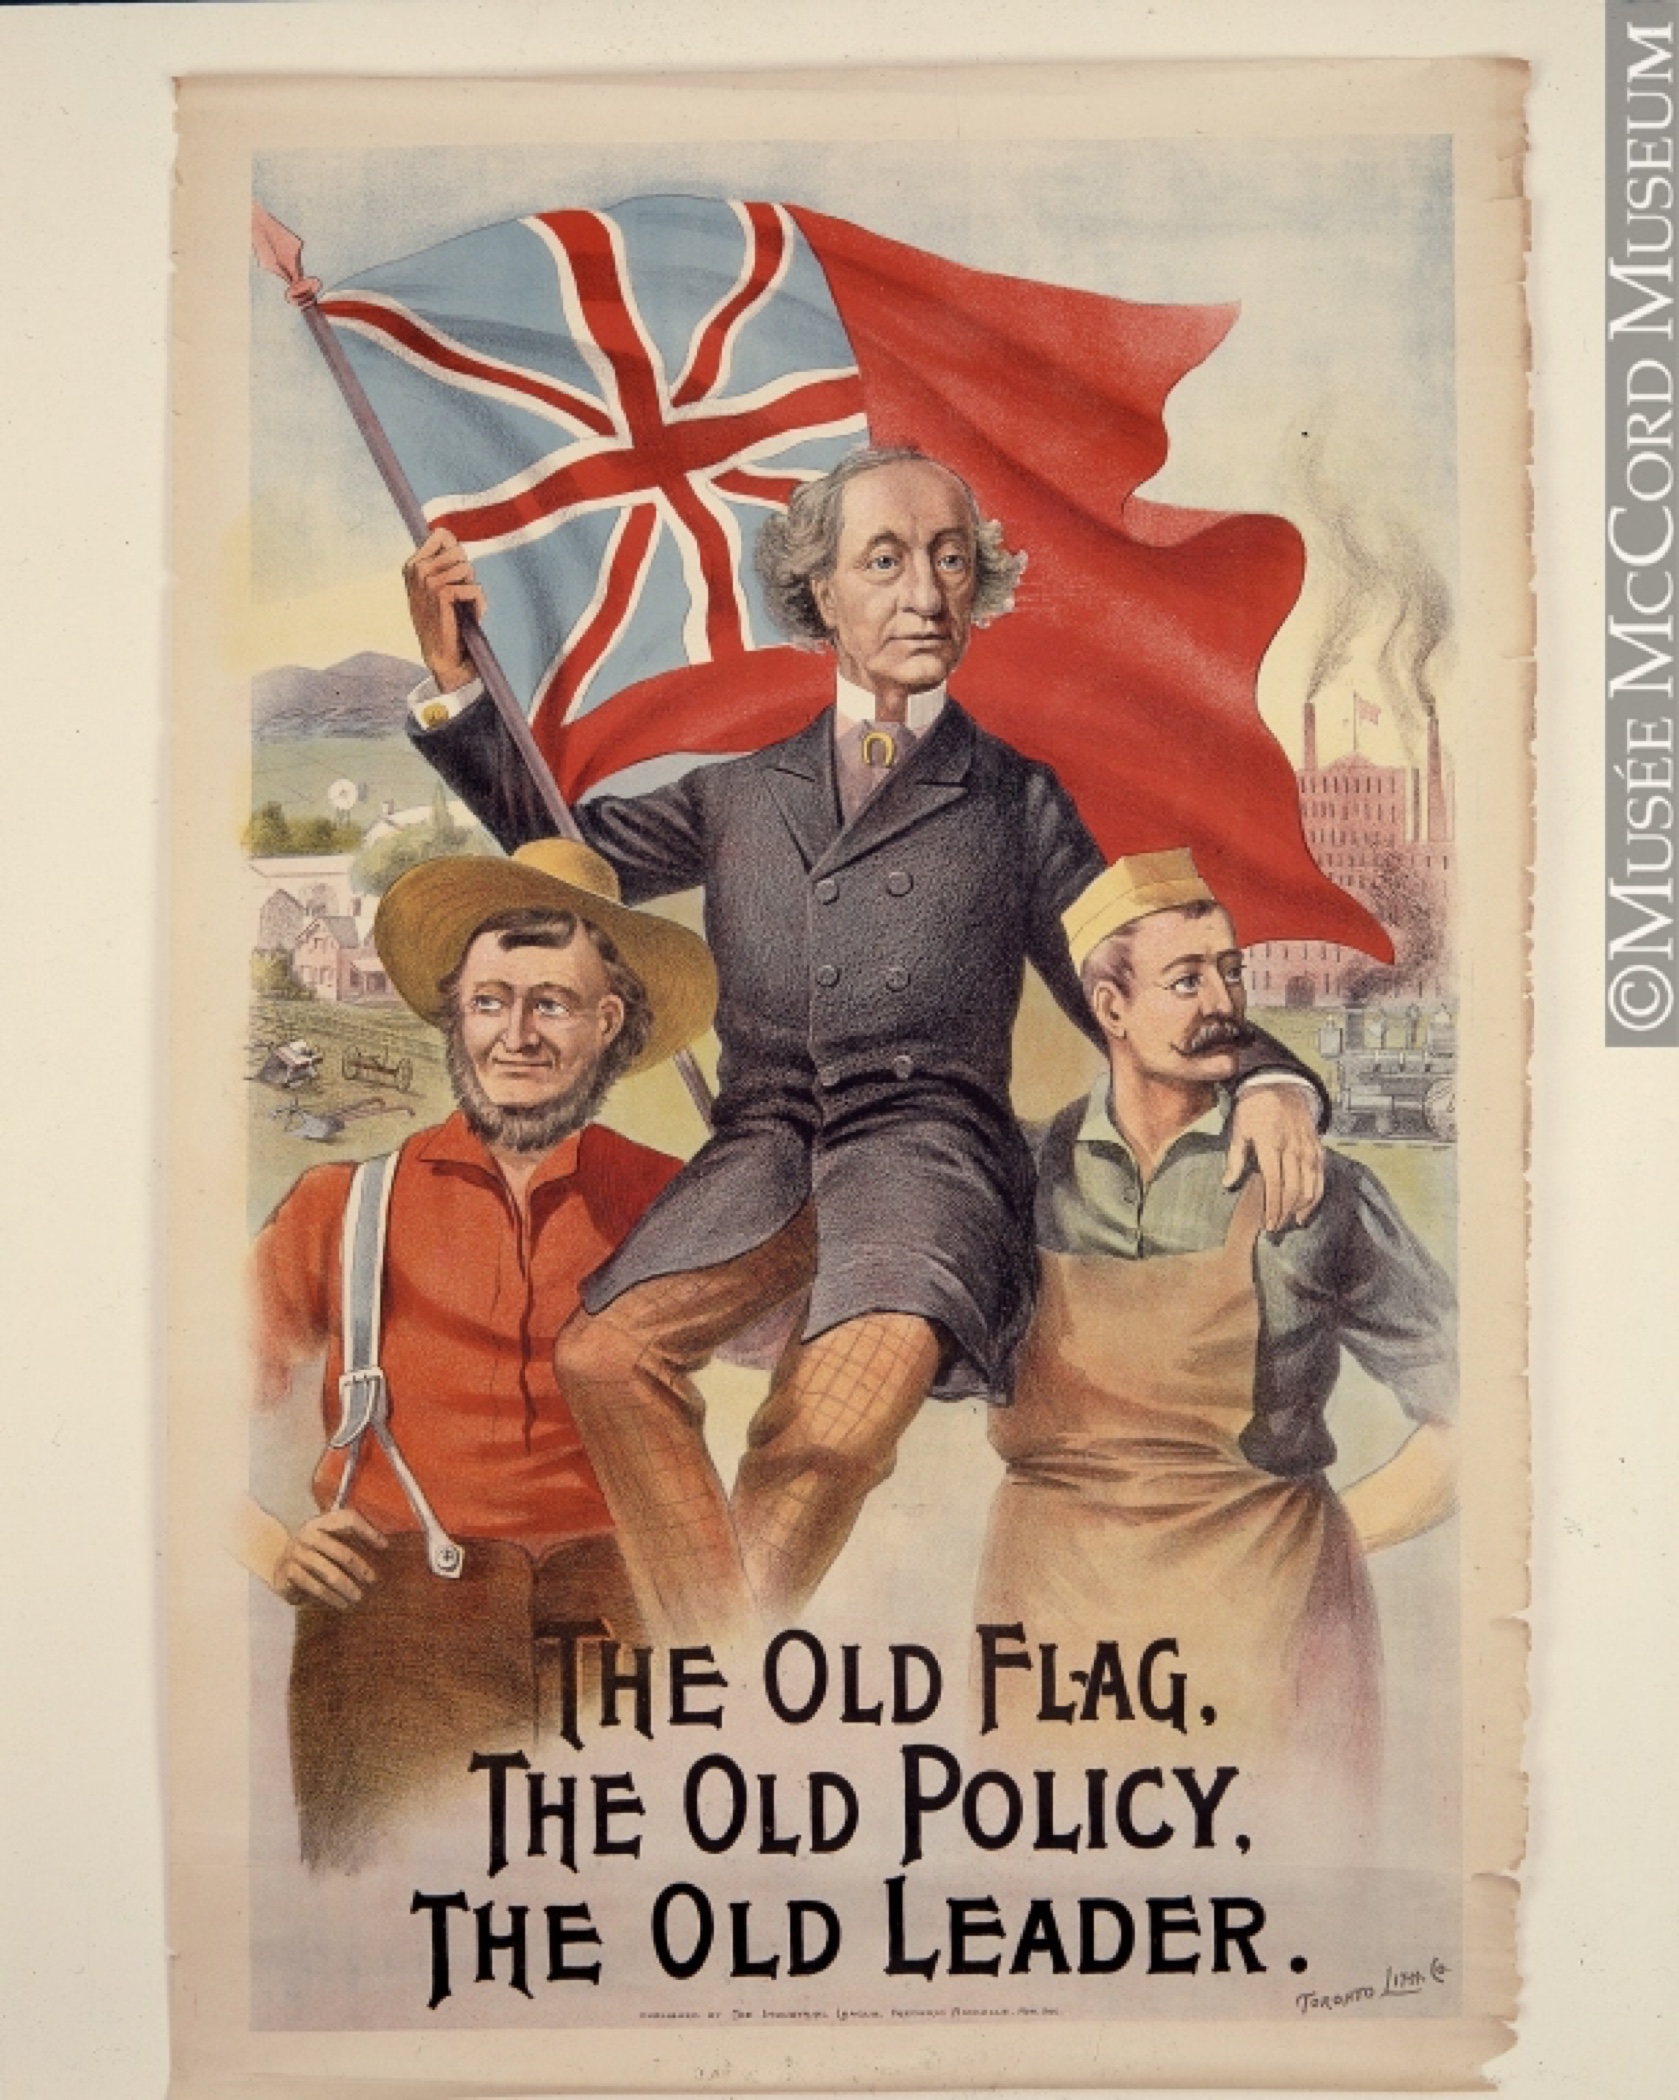 A colourful watercolour-style painting designed as an election poster, depicting two men - a farmer and possibly a butcher - who are together, on their shoulders hoisting Sir John A. Macdonald, who is carrying the British flag known as the Red Ensign, with a proud expression on his face. Under the image are the words, The Old Flag, The Old Policy, The Old Leader.